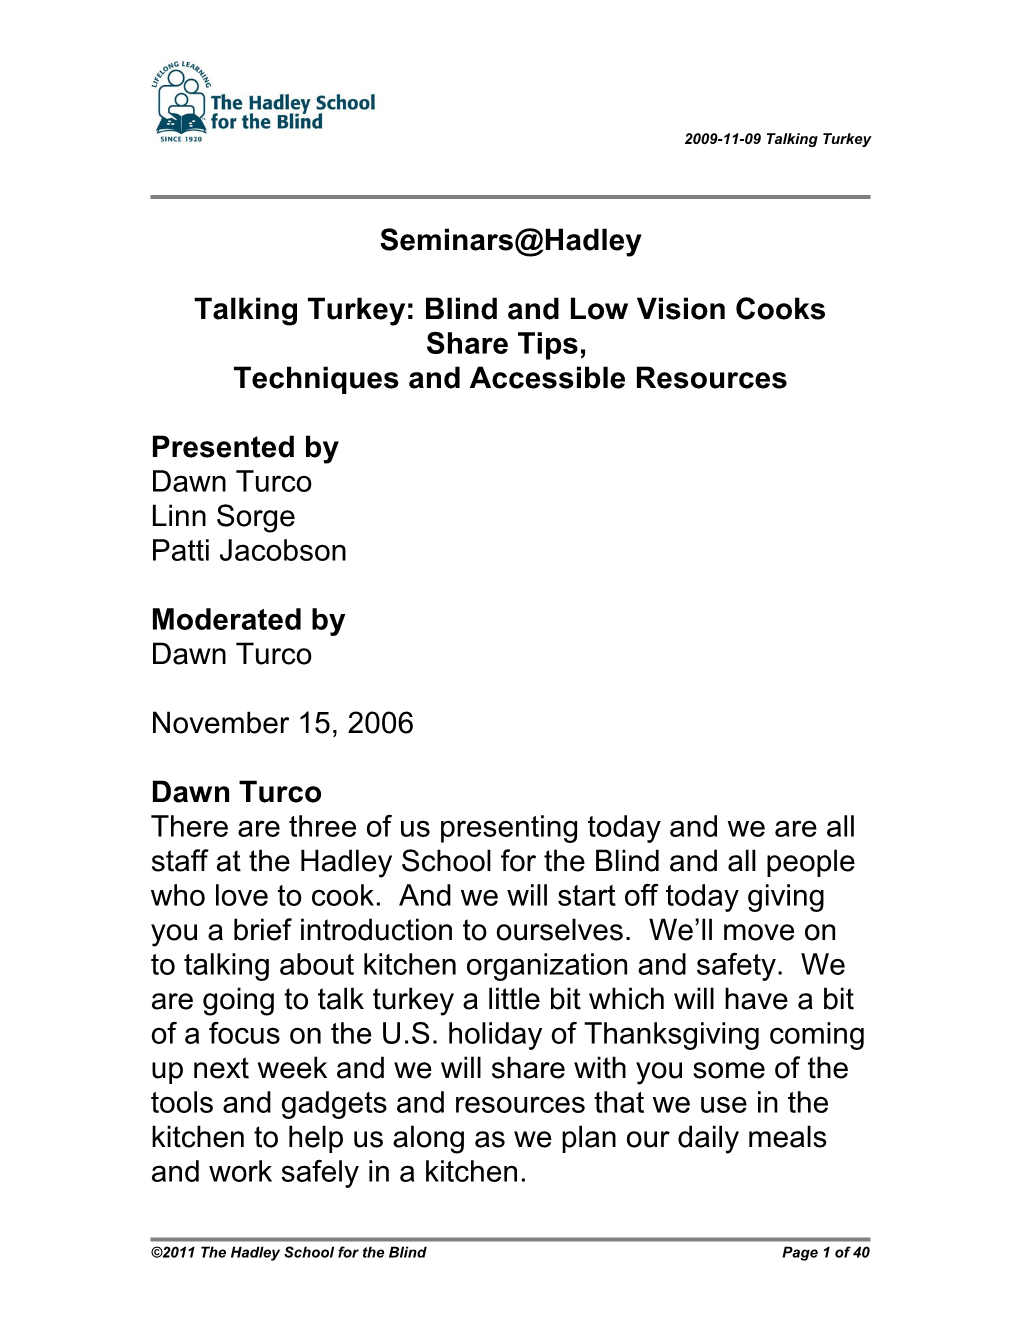 Talking Turkey: Blind and Low Vision Cooks Share Tips